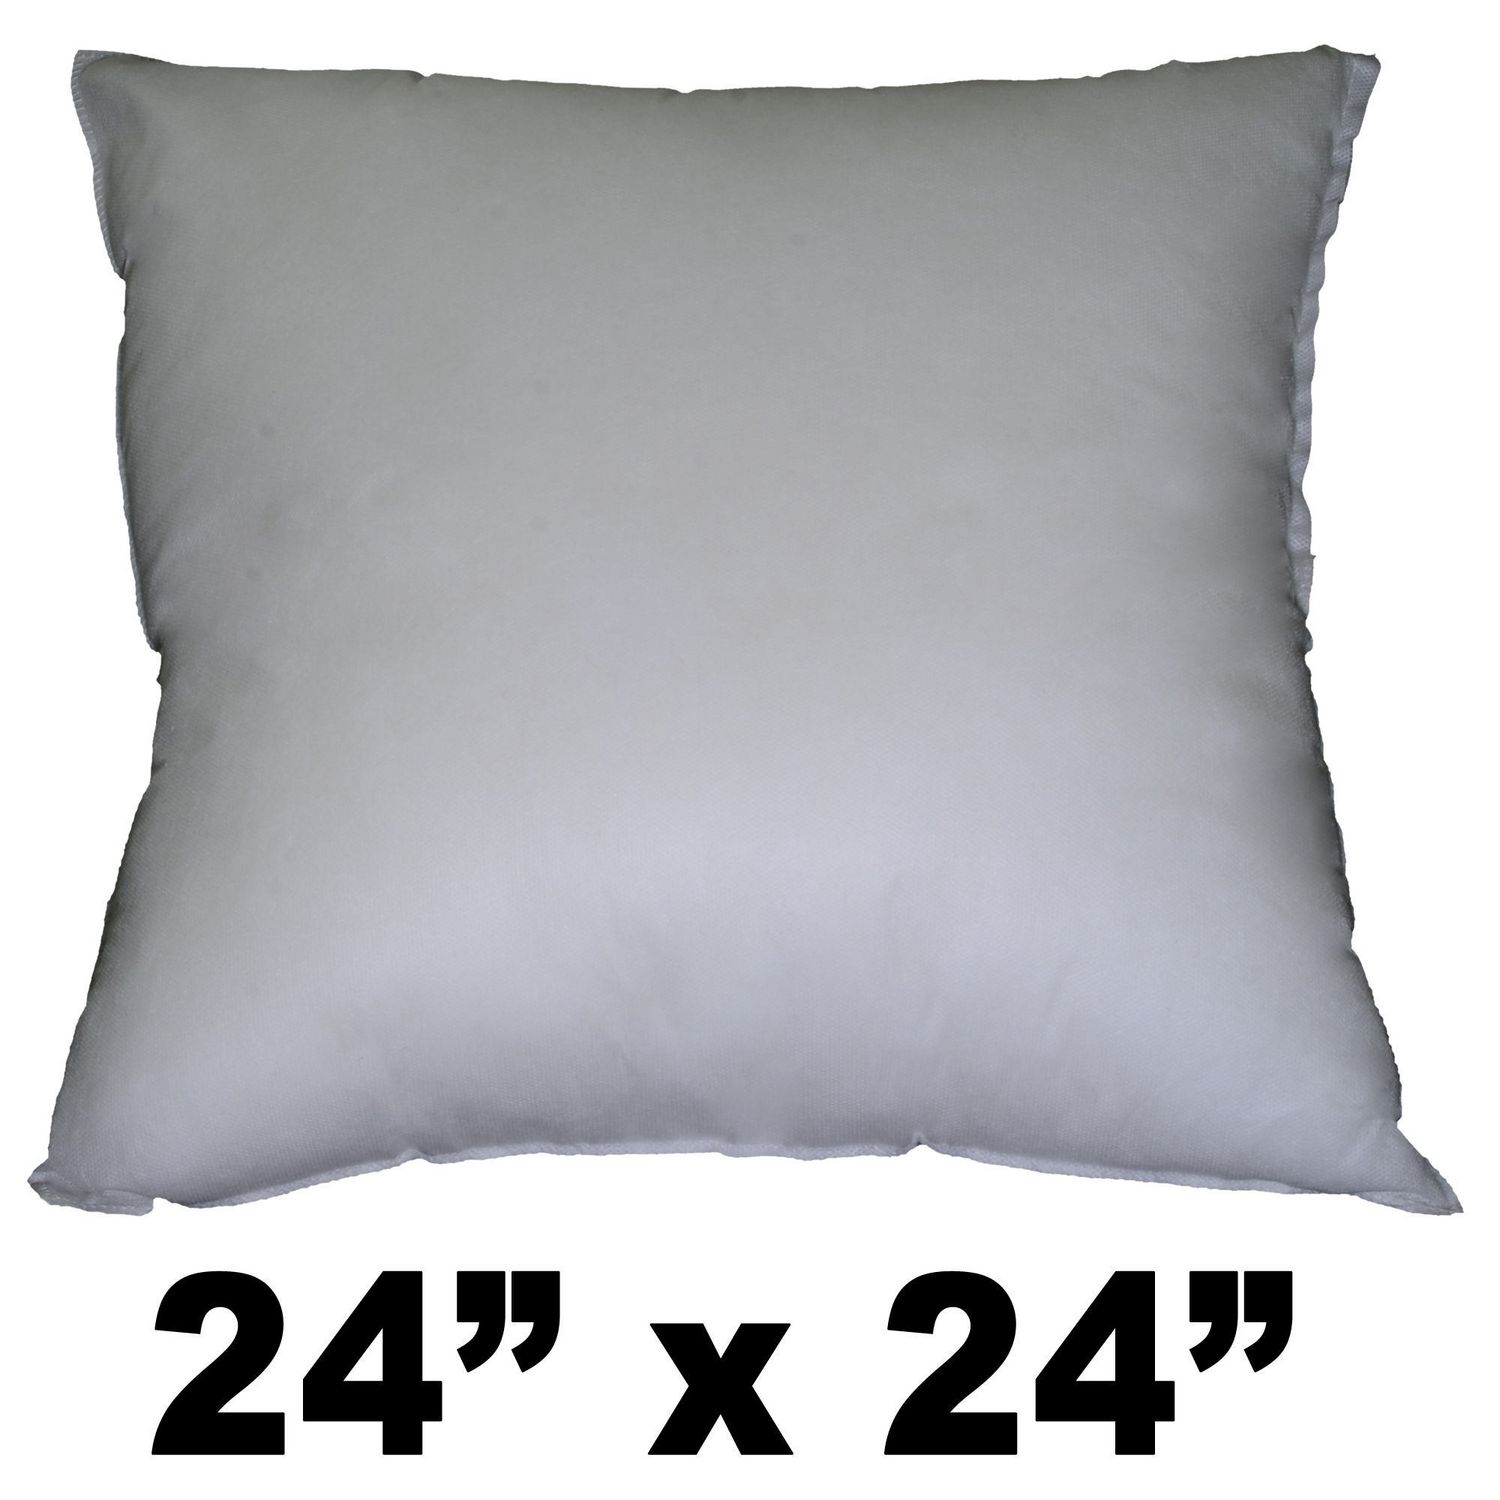 6 Pack Hometex Canada Pillow Insert 12 x 24 Polyester Filled Standard Cover